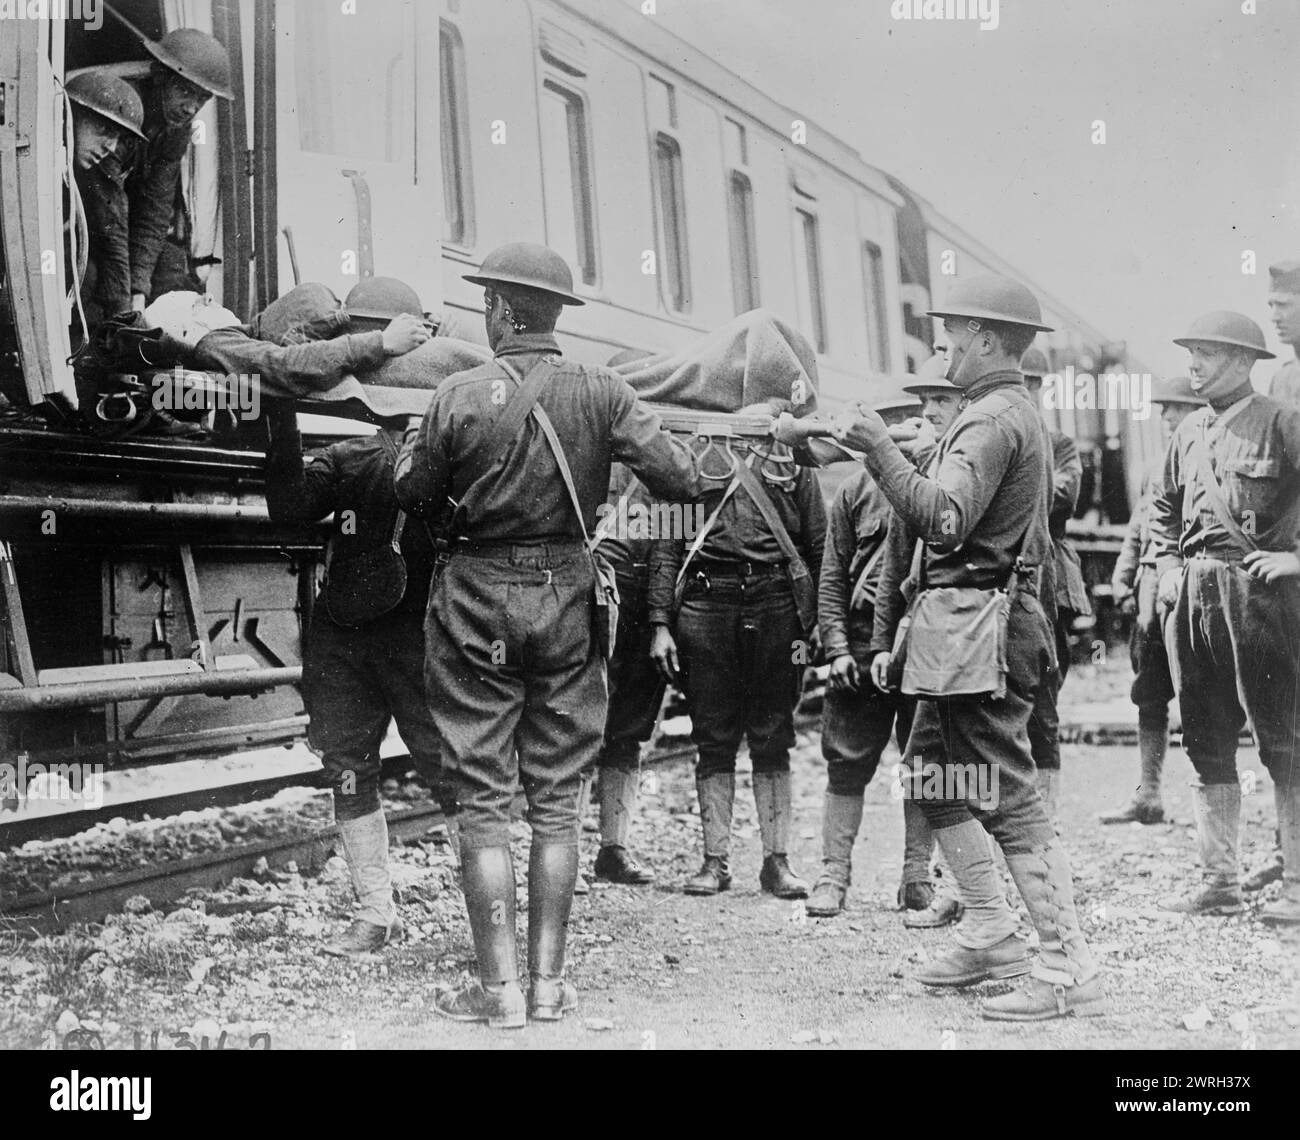 American soldiers &amp; wounded, 27 Apr 1918. American soldiers carrying wounded troops onto hospital train at Horreville, France, April 27, 1918. Stock Photo